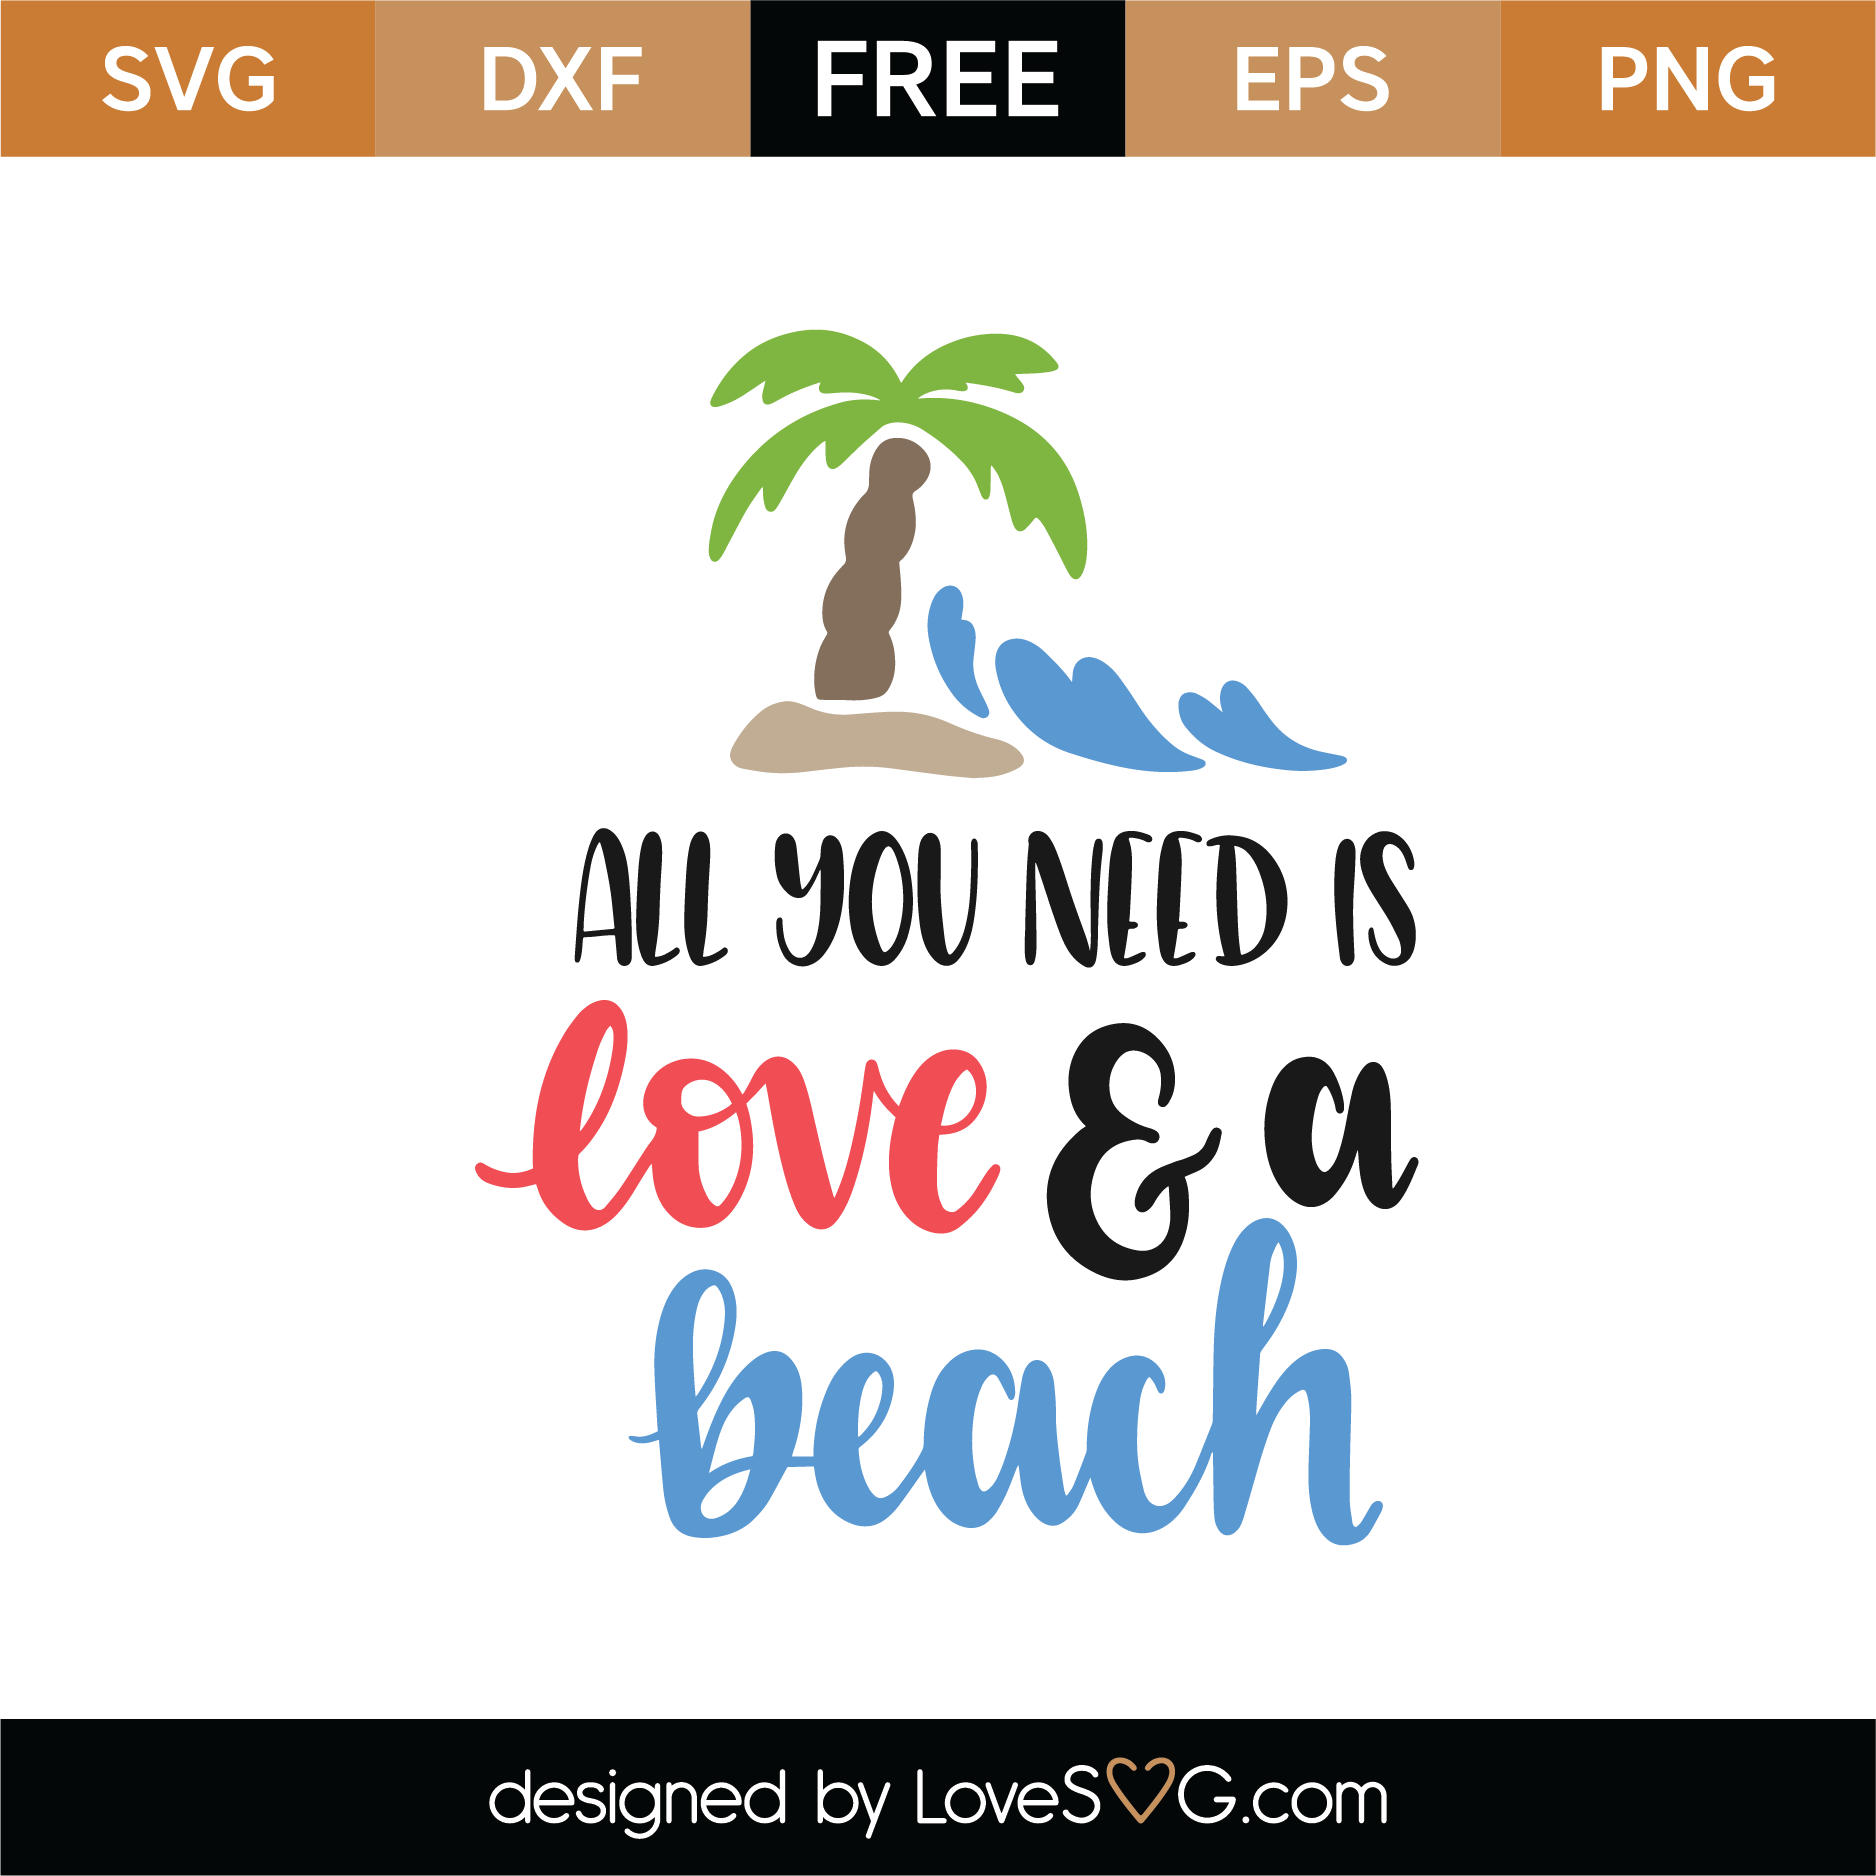 Download Free All You Need is Love And A Beach SVG Cut File | Lovesvg.com